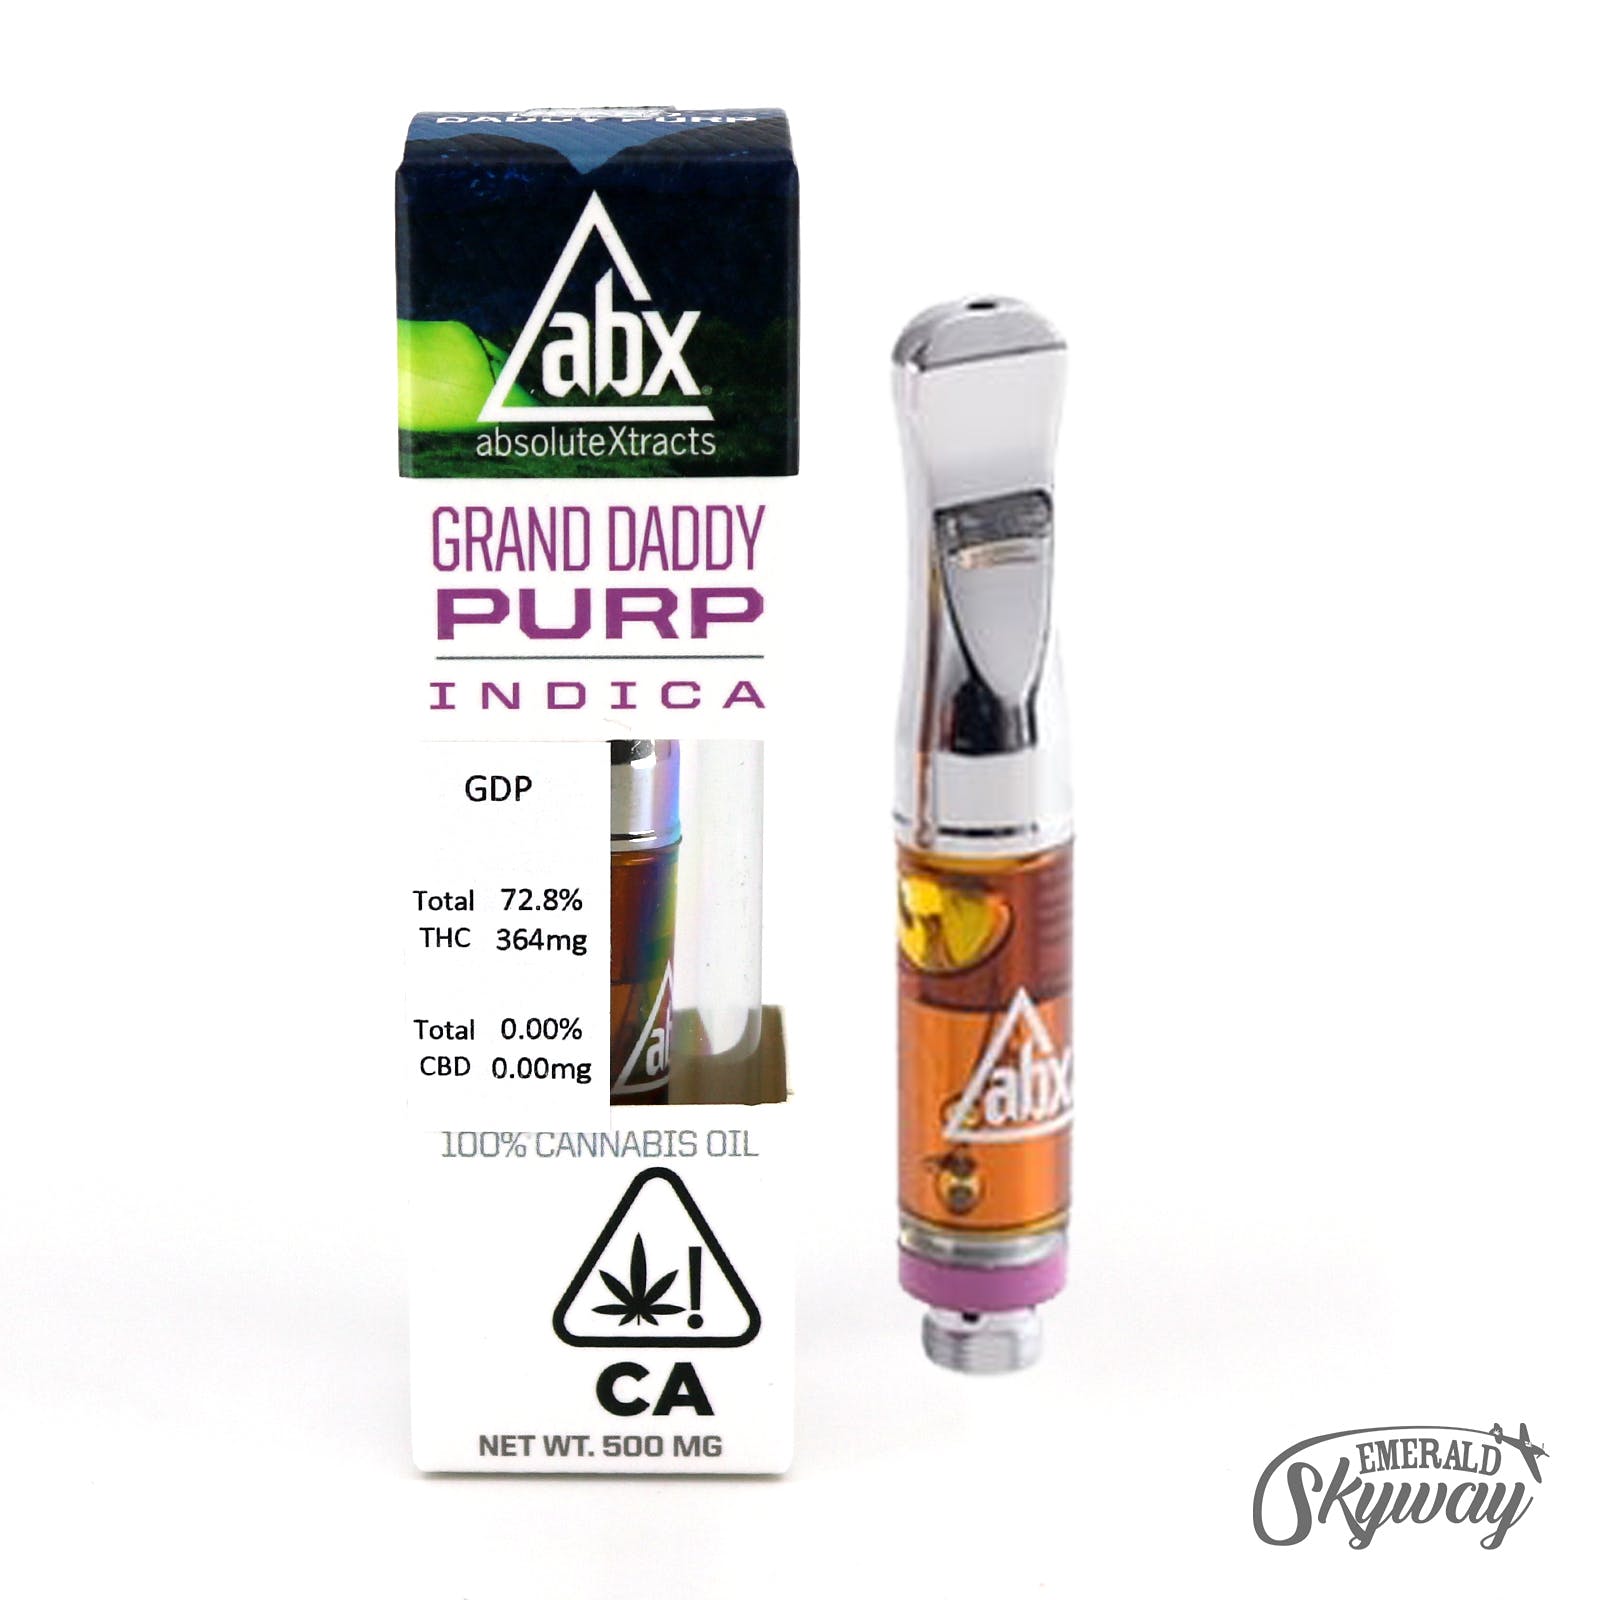 AbsoluteXtracts: Granddaddy Purp Cartridge